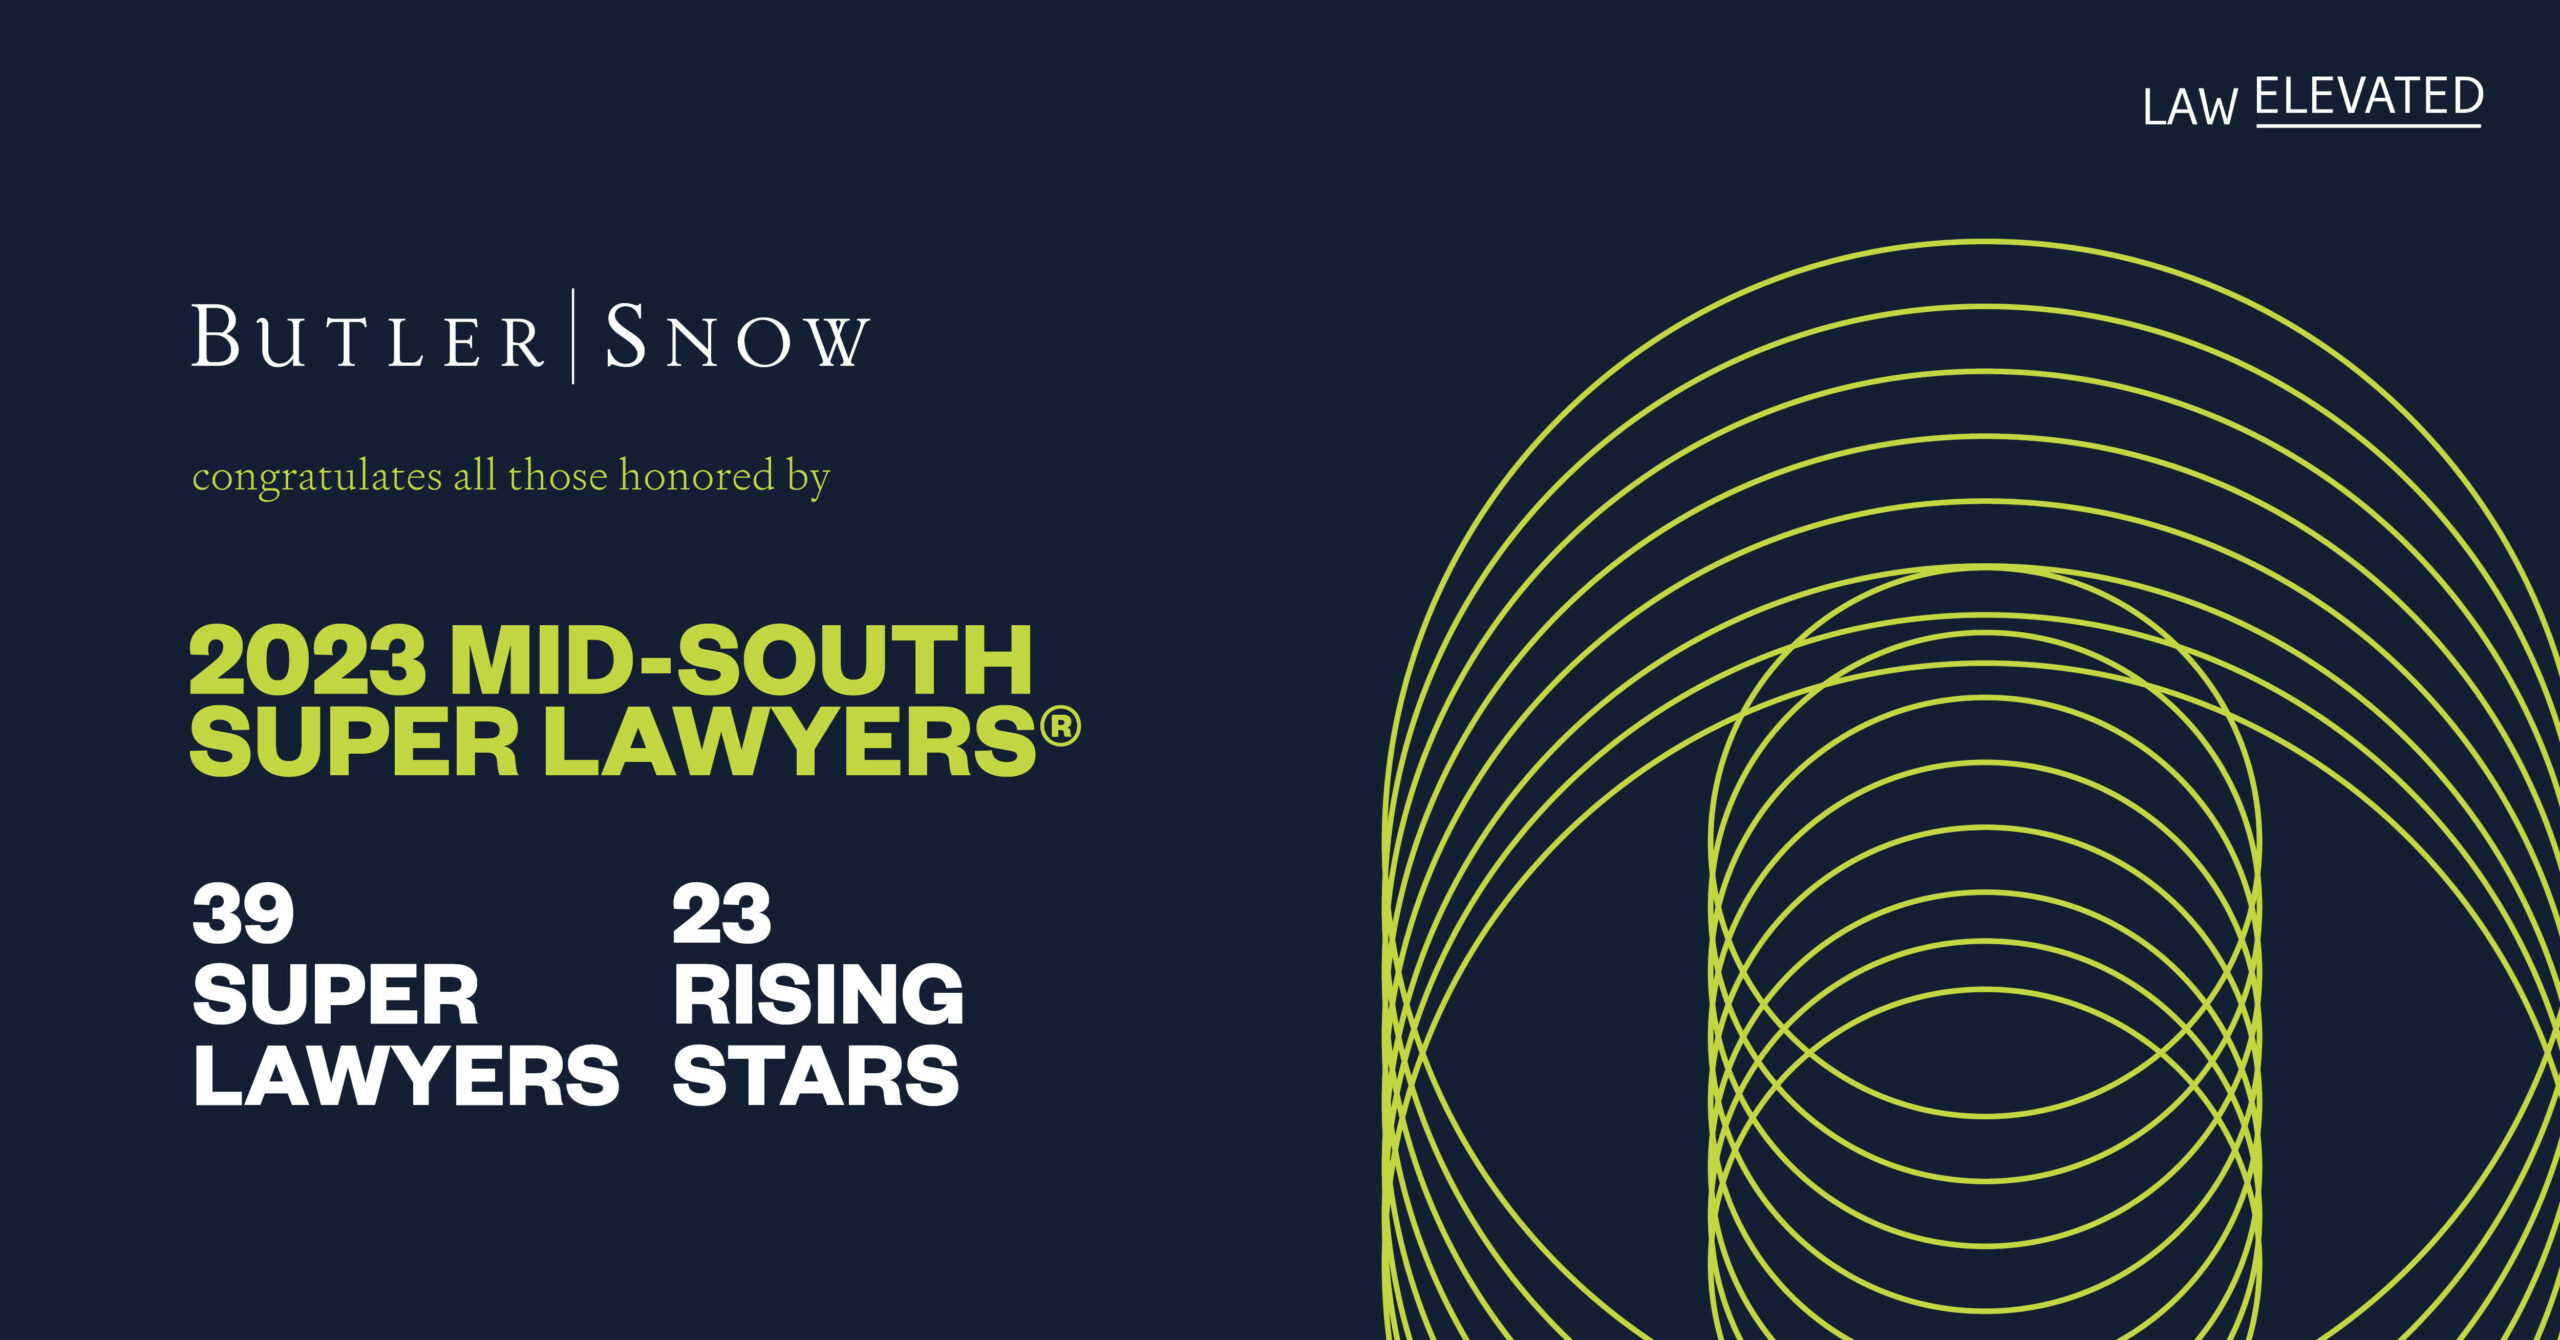 Mid-South Super Lawyers® 2023 Recognizes 62 Butler Snow Attorneys